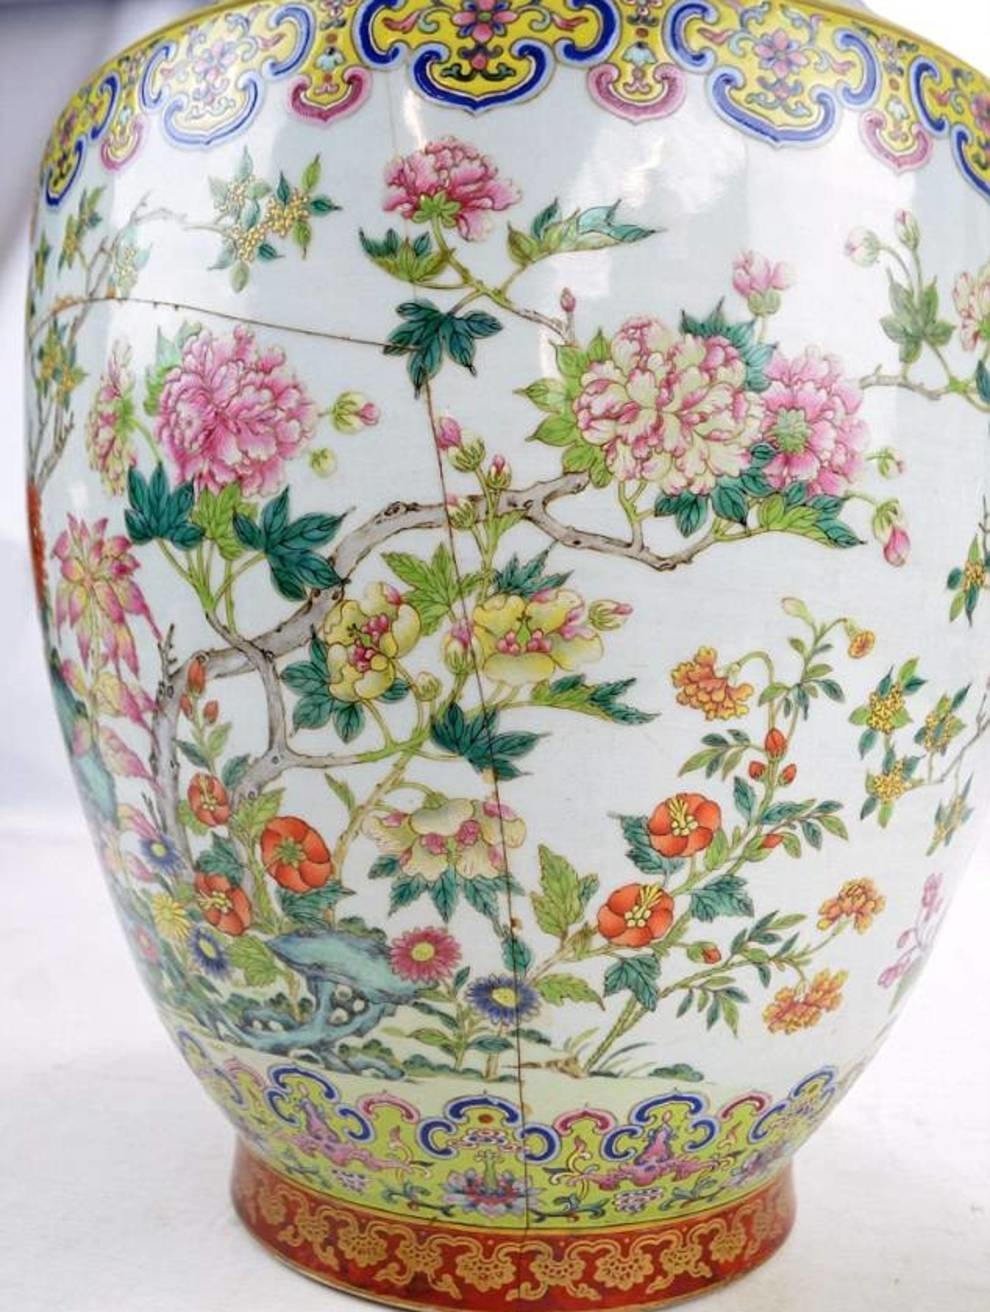 Once this vase was bought for 200 pounds and did not attach any importance to the imperial stamp on its bottom